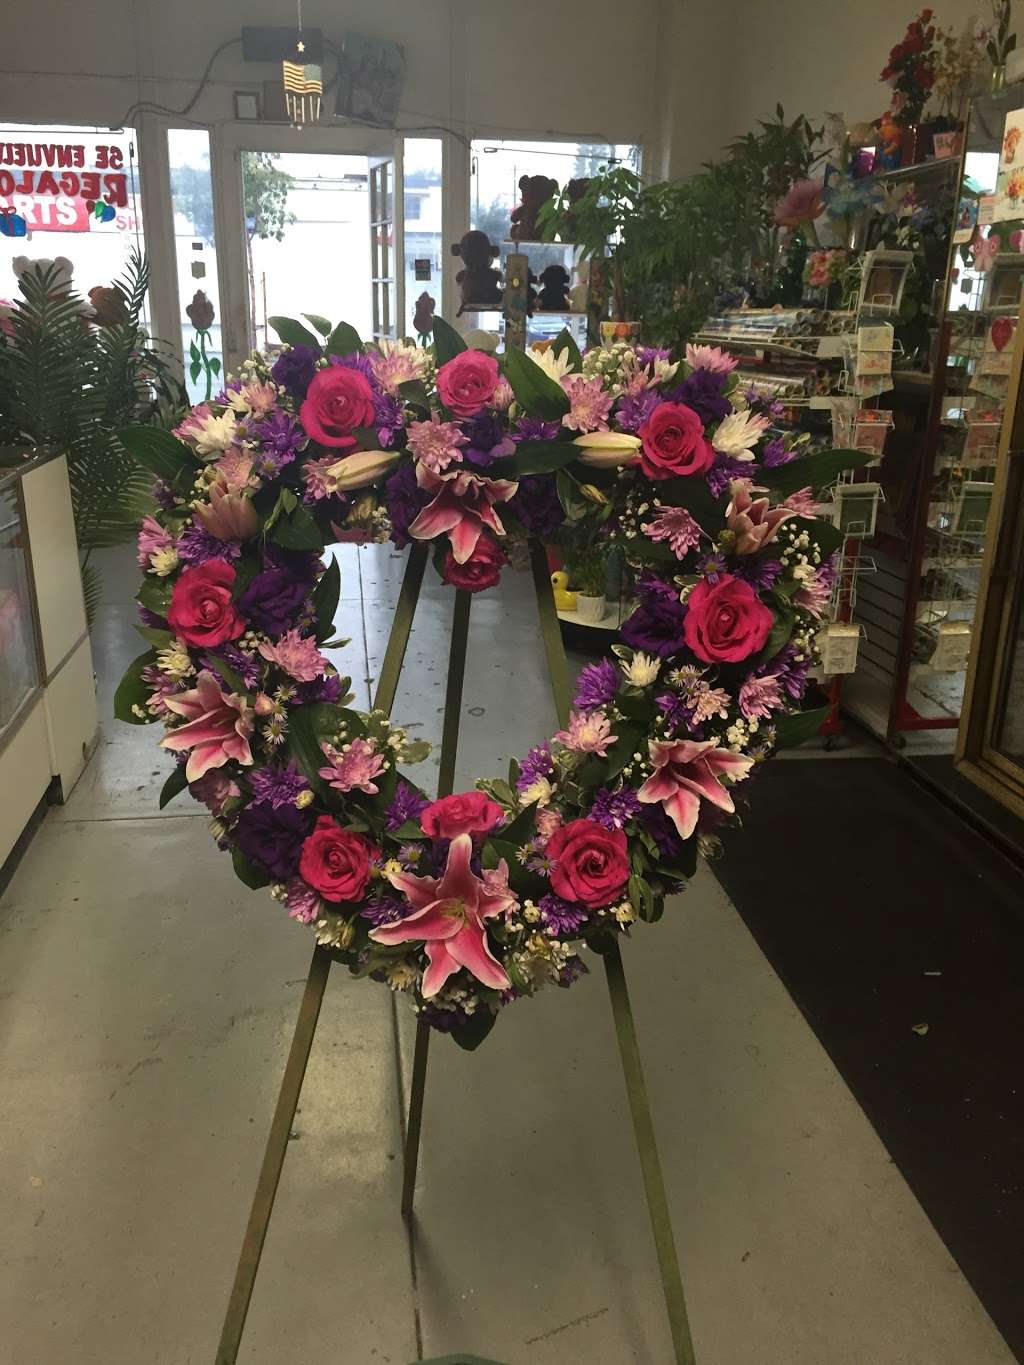 Melinas Flowers & Gift Shop | 3550 Gage Ave, Bell, CA 90201 | Phone: (323) 588-7157